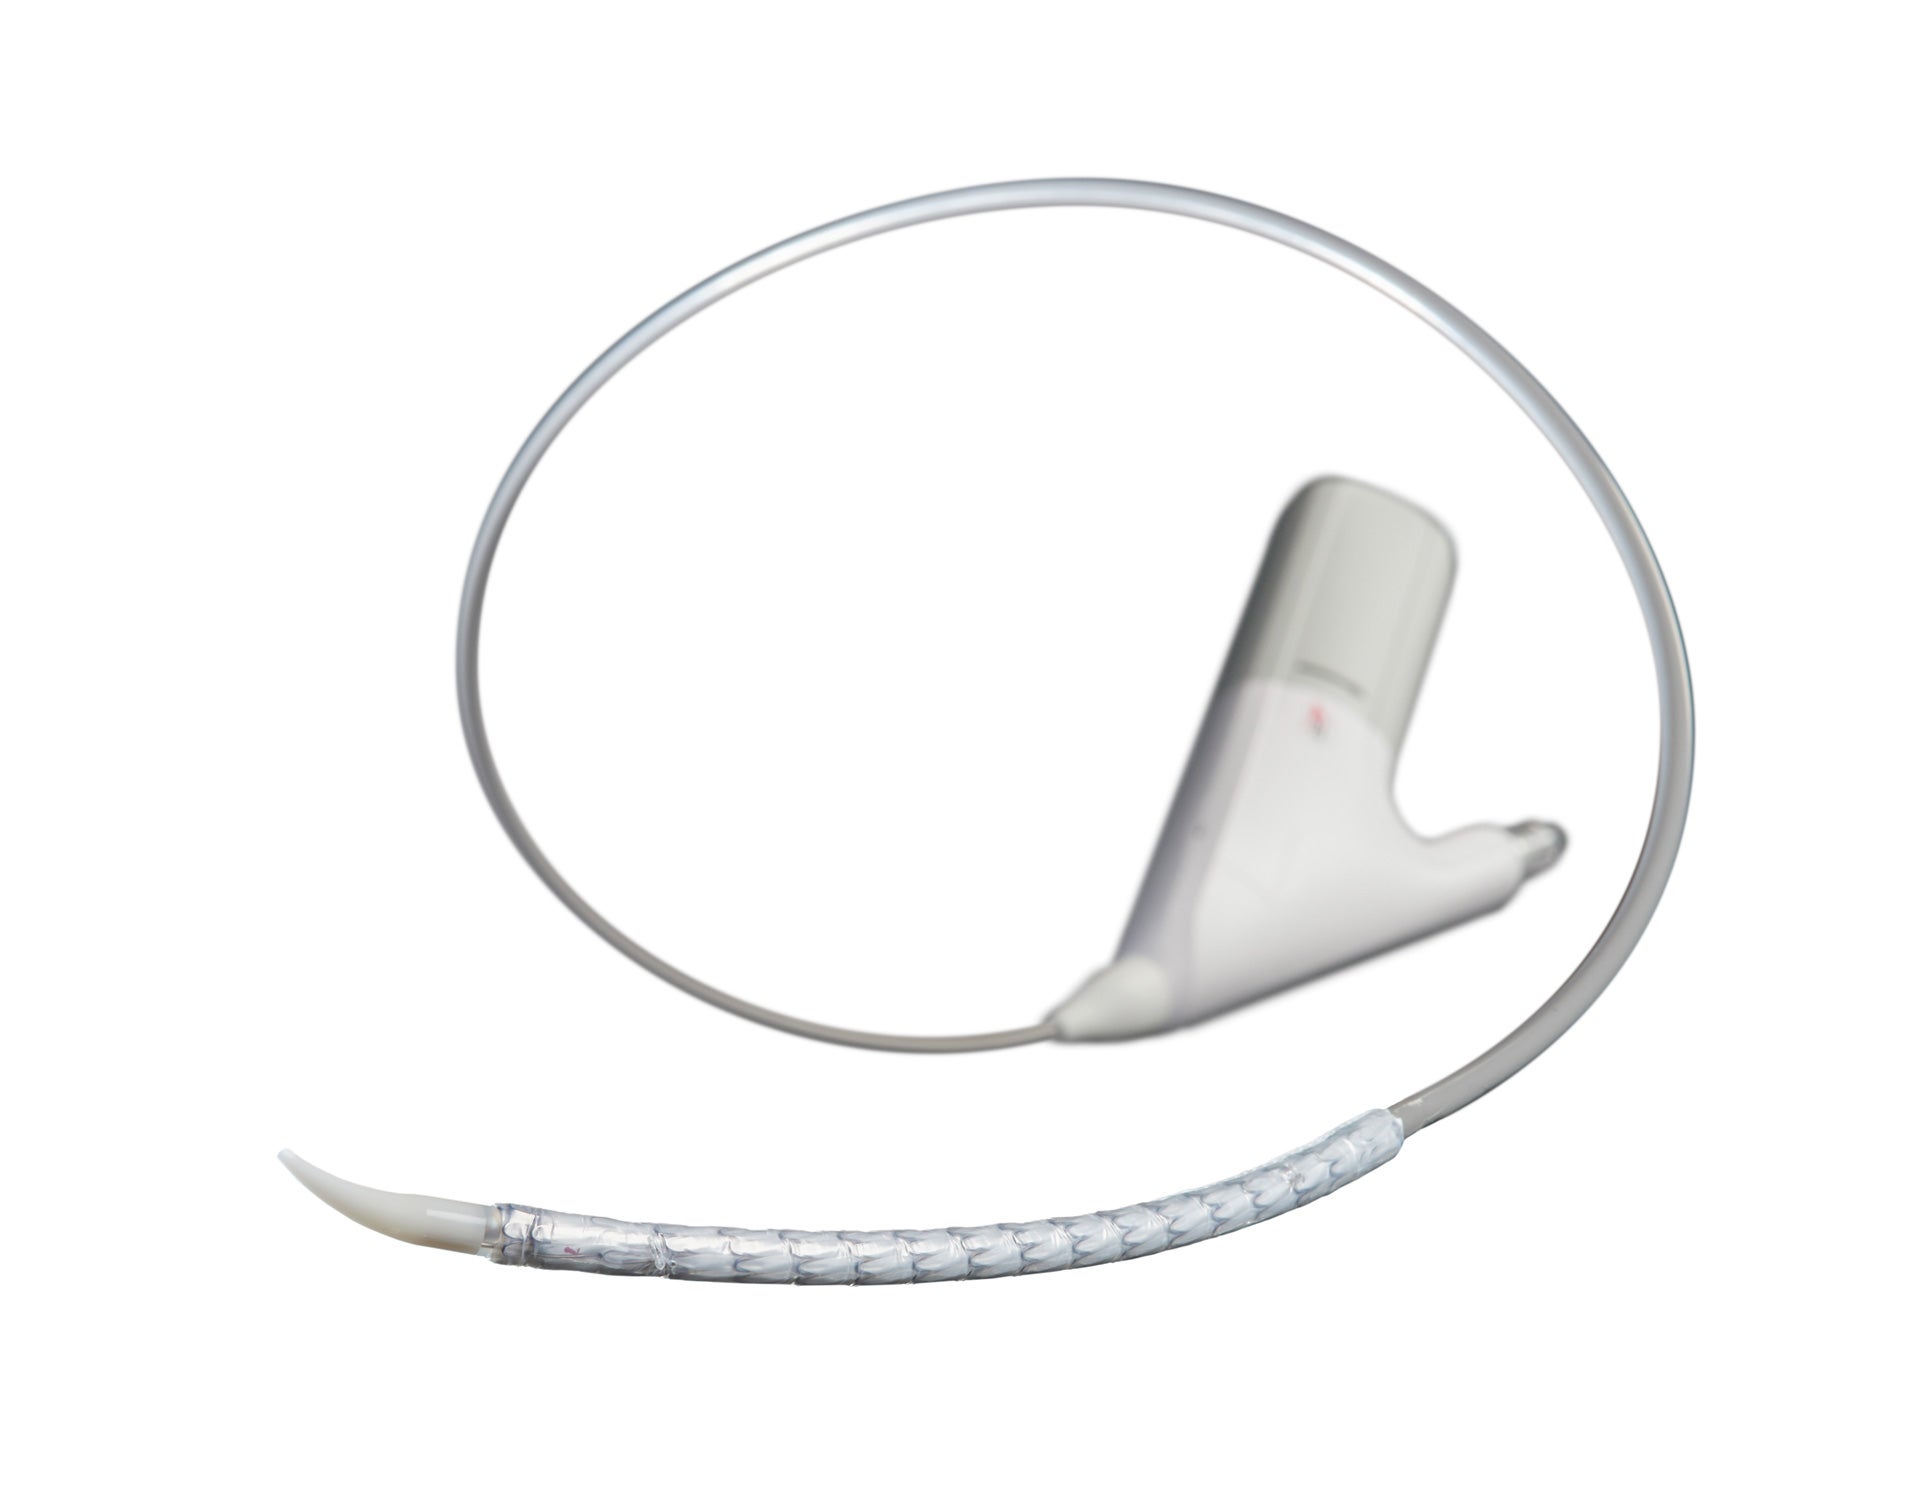 GORE® TAG® Conformable Thoracic Stent Graft with ACTIVE CONTROL System